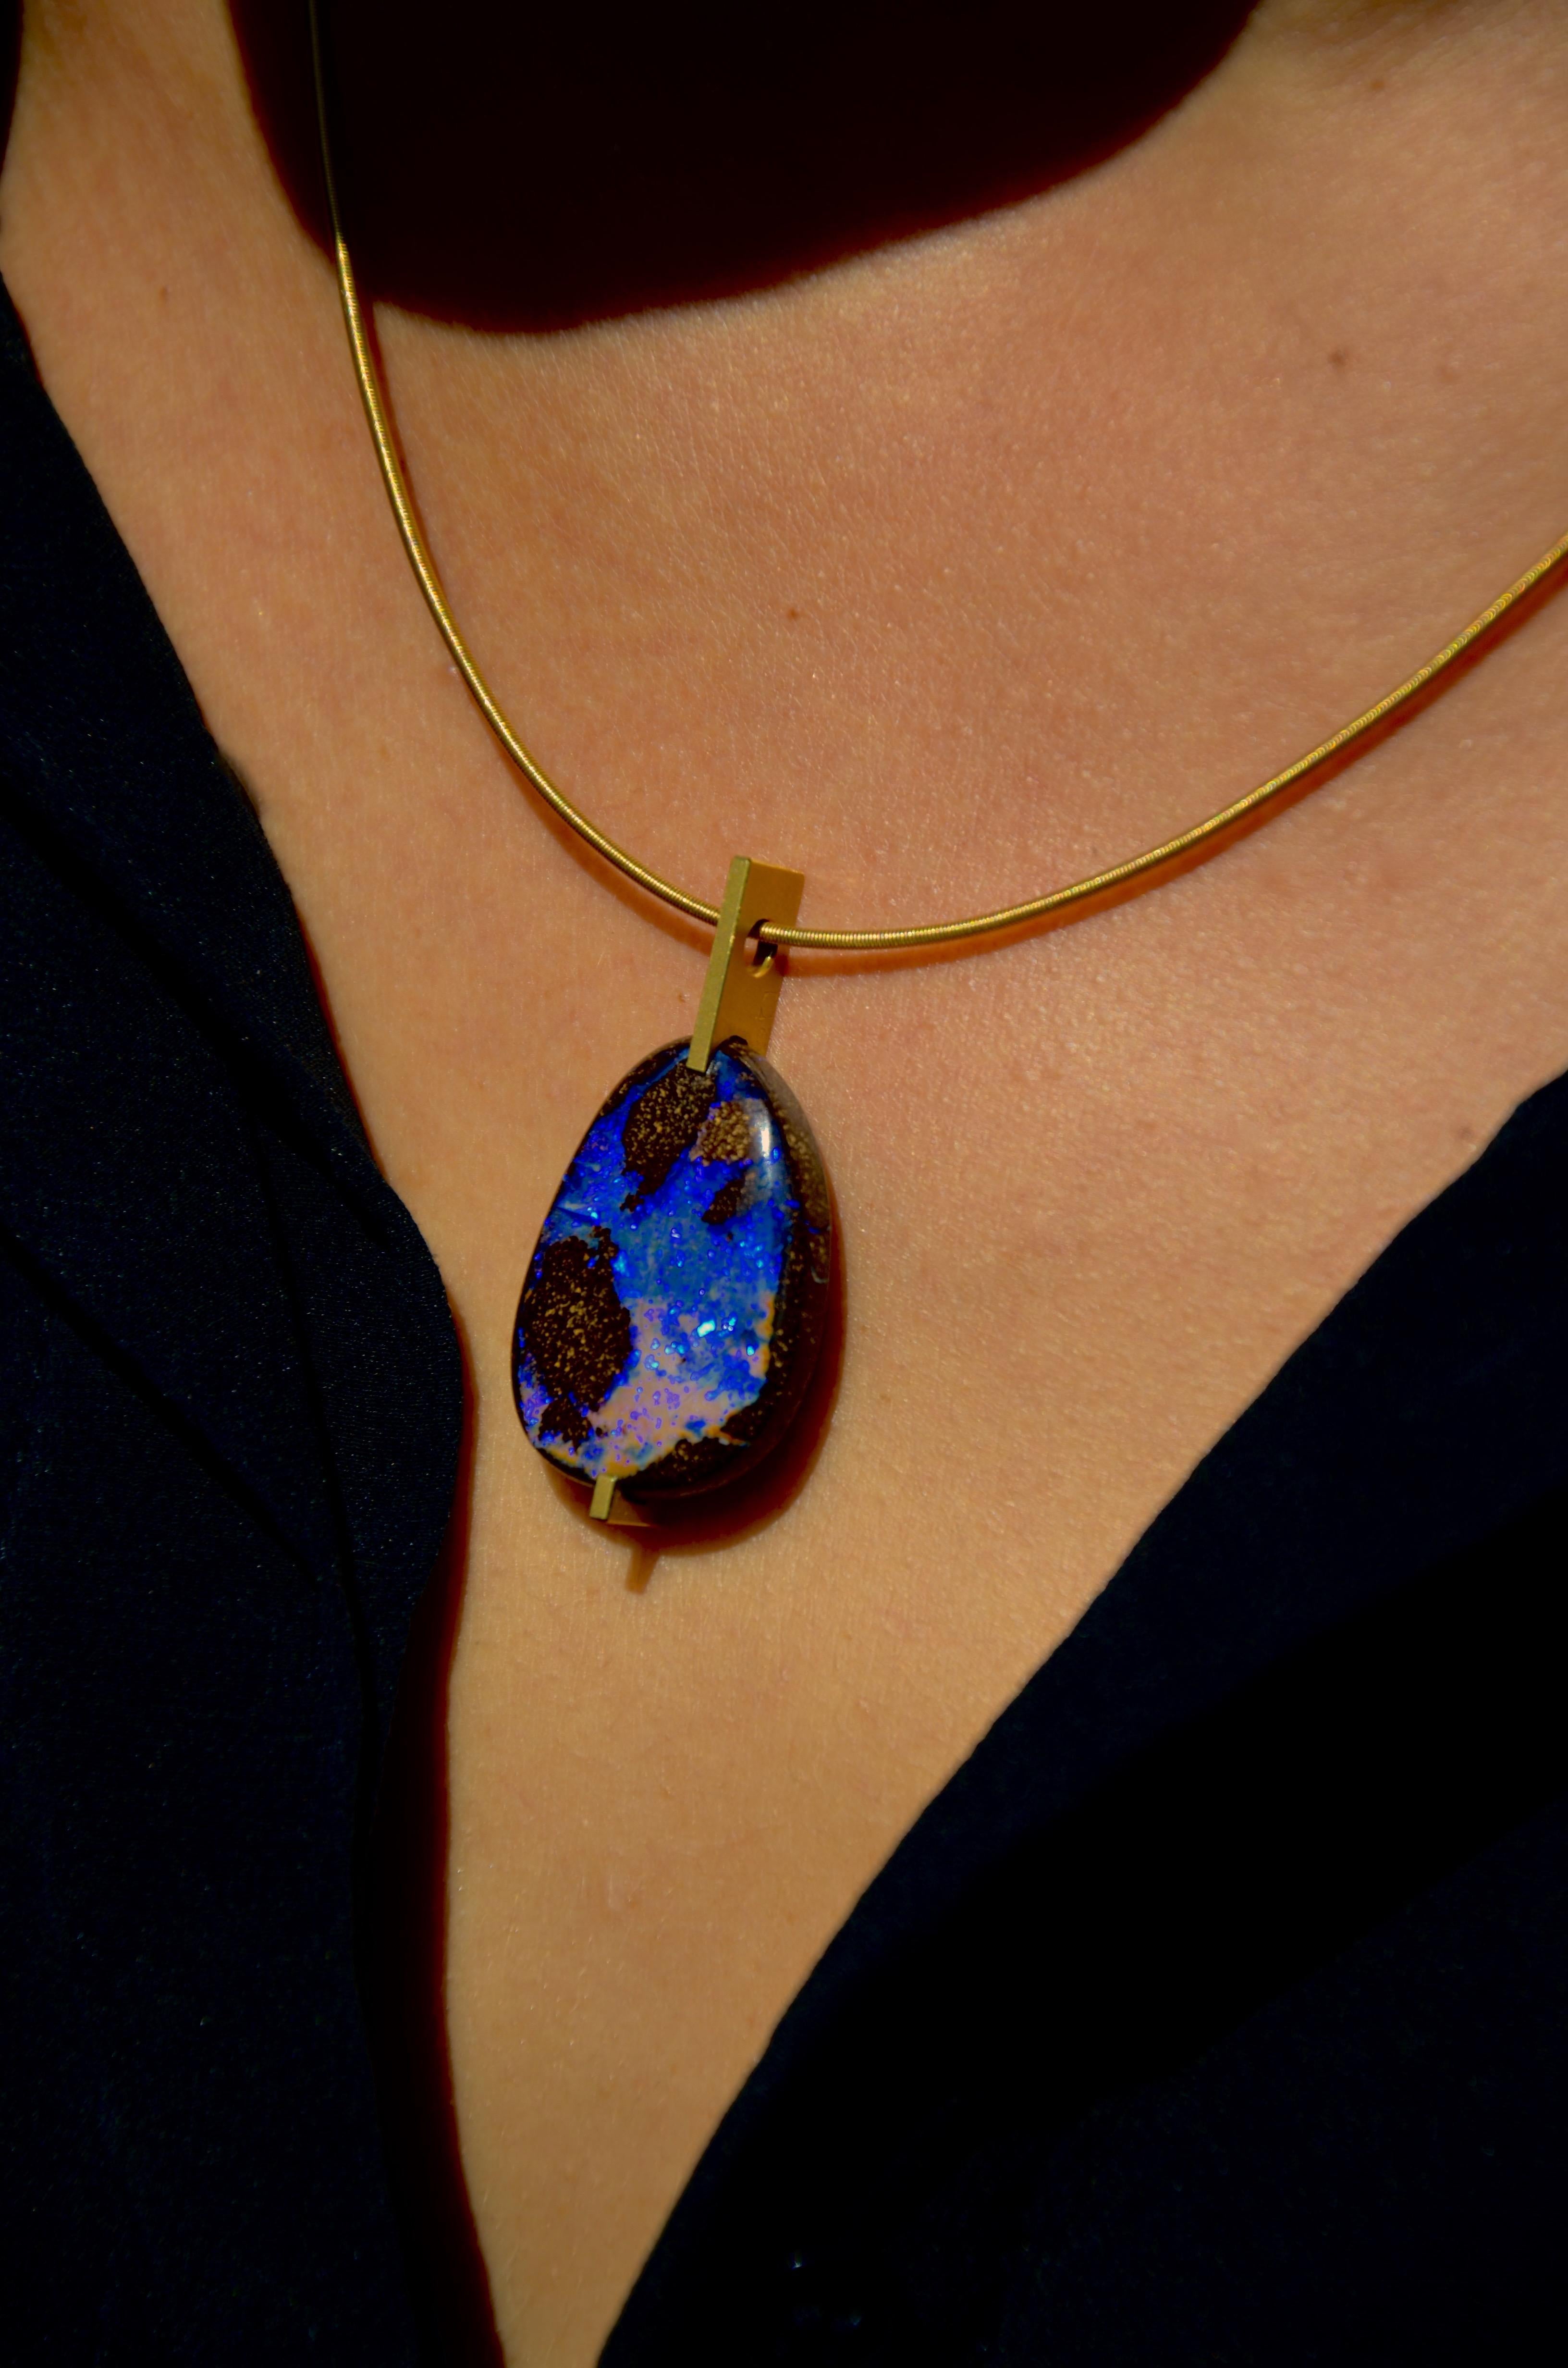 18 karat Gold Opal Pendant 

Boulder Opal in blue, vieolet, pink and many more colours to explore, set in 18 karat Yellow Gold.
Incredibly luminous and colorful, a whole world opens up when gazing at this gemstone. This is the reason Arno Schneider